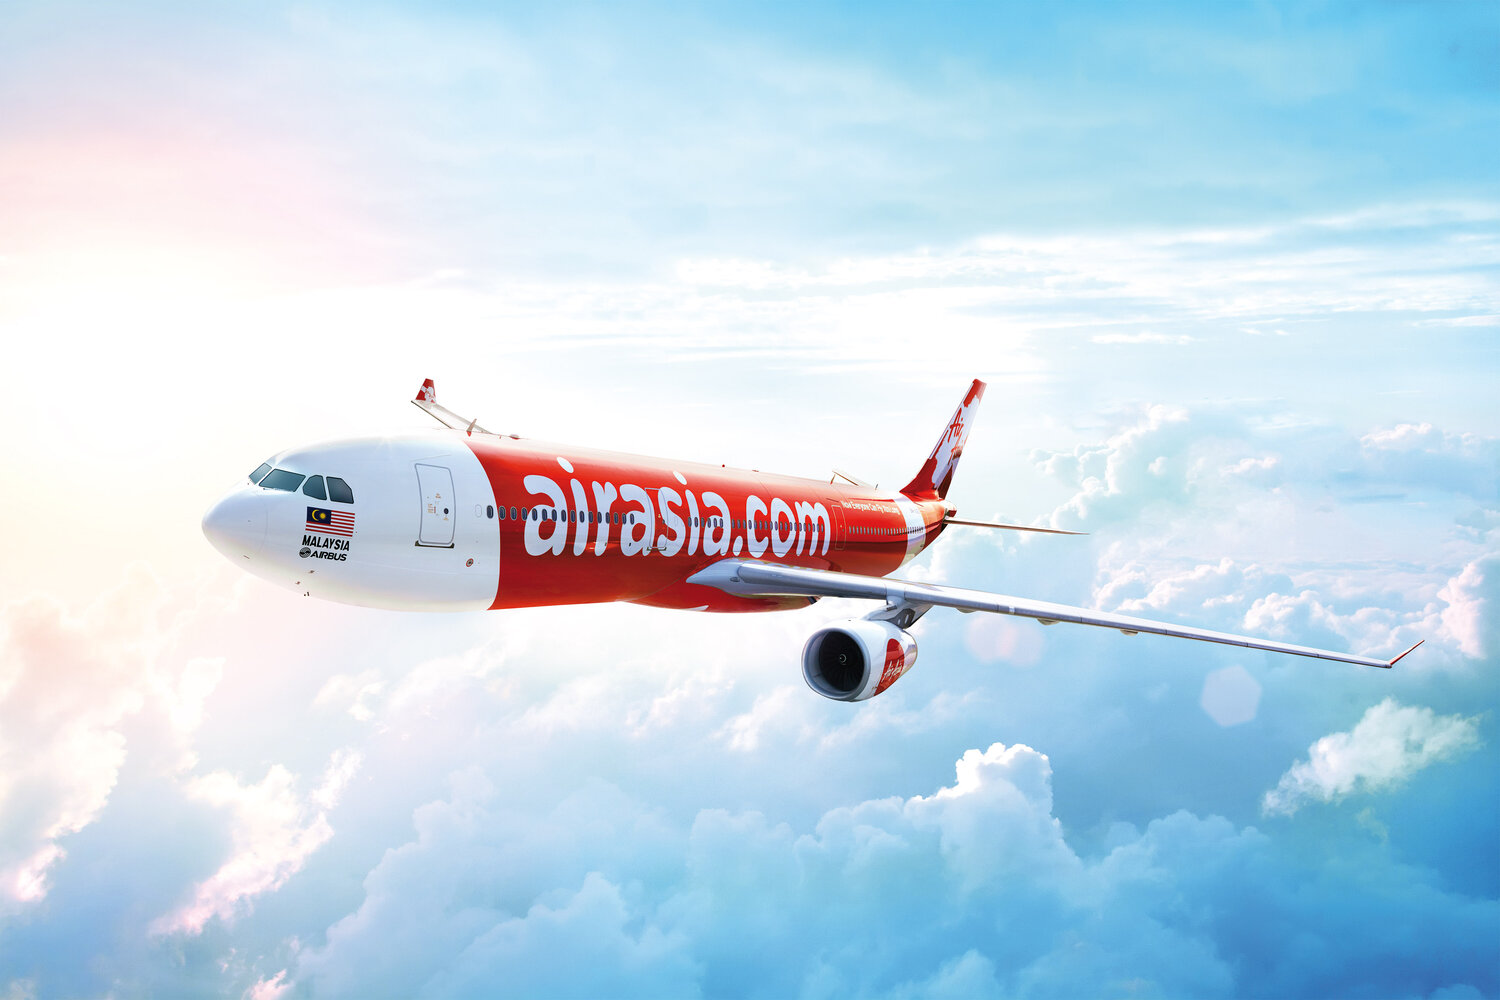 Fly to Asia with AirAsia with domestic fares in Asia starting from less than NZ$ 10